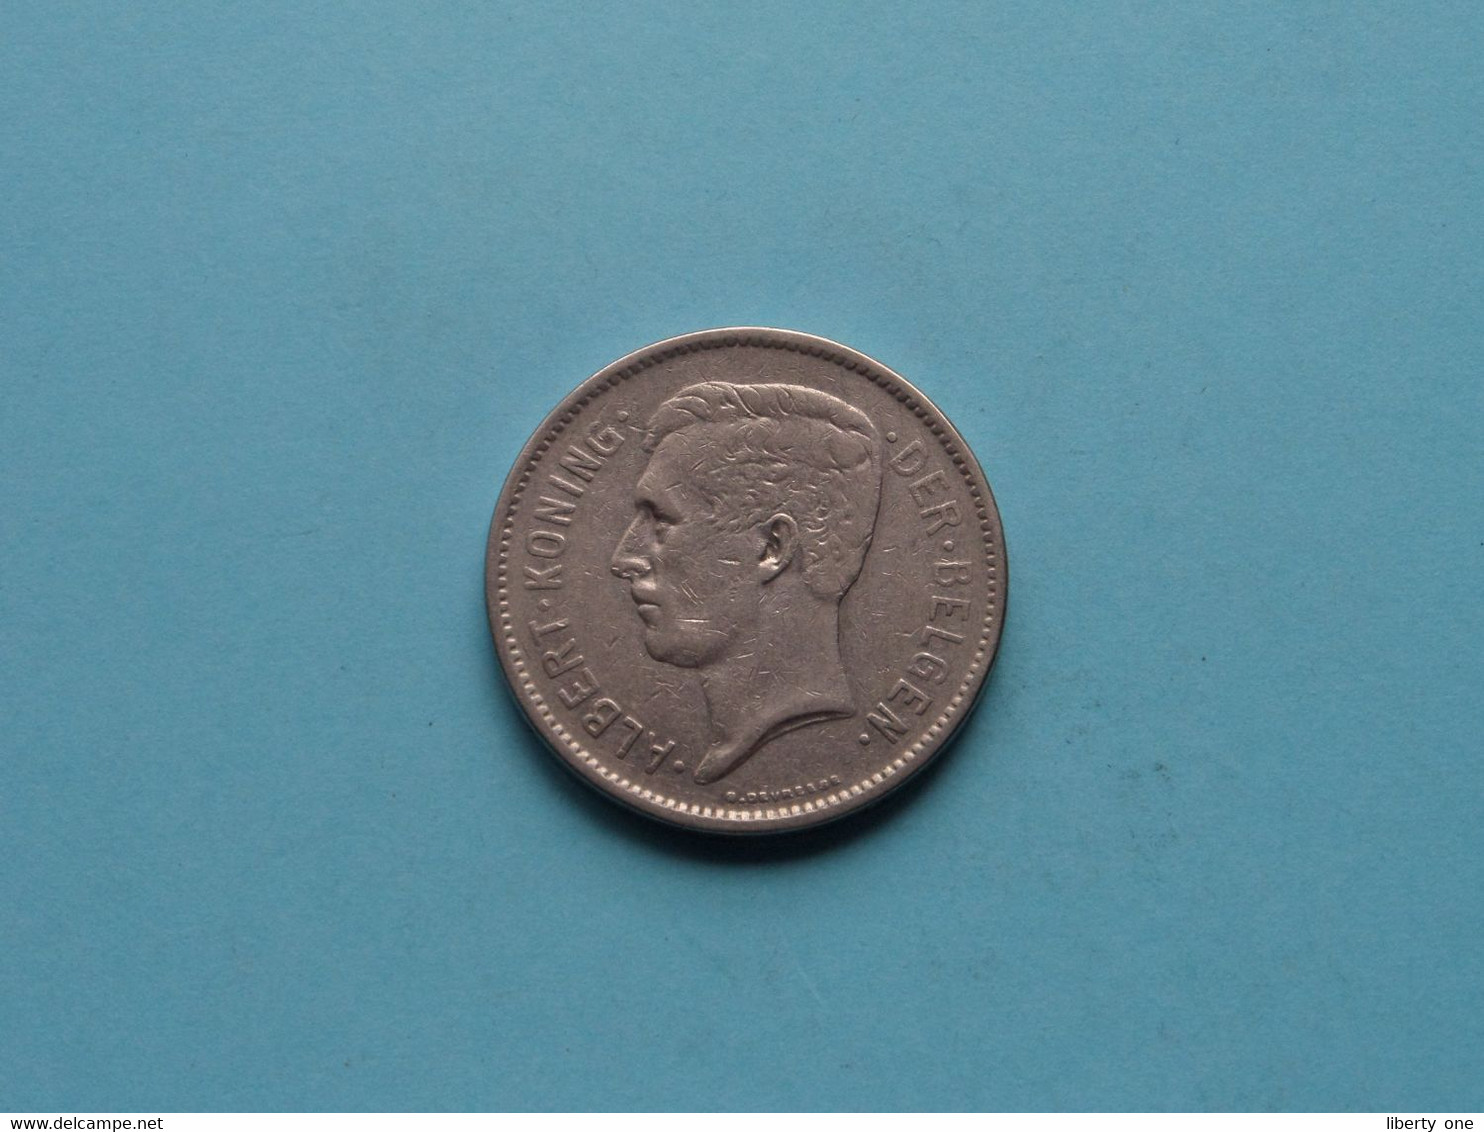 1931 VL - 5 Frank / KM 98 > ( Uncleaned Coin / For Grade, Please See Photo ) ! - 5 Frank & 1 Belga